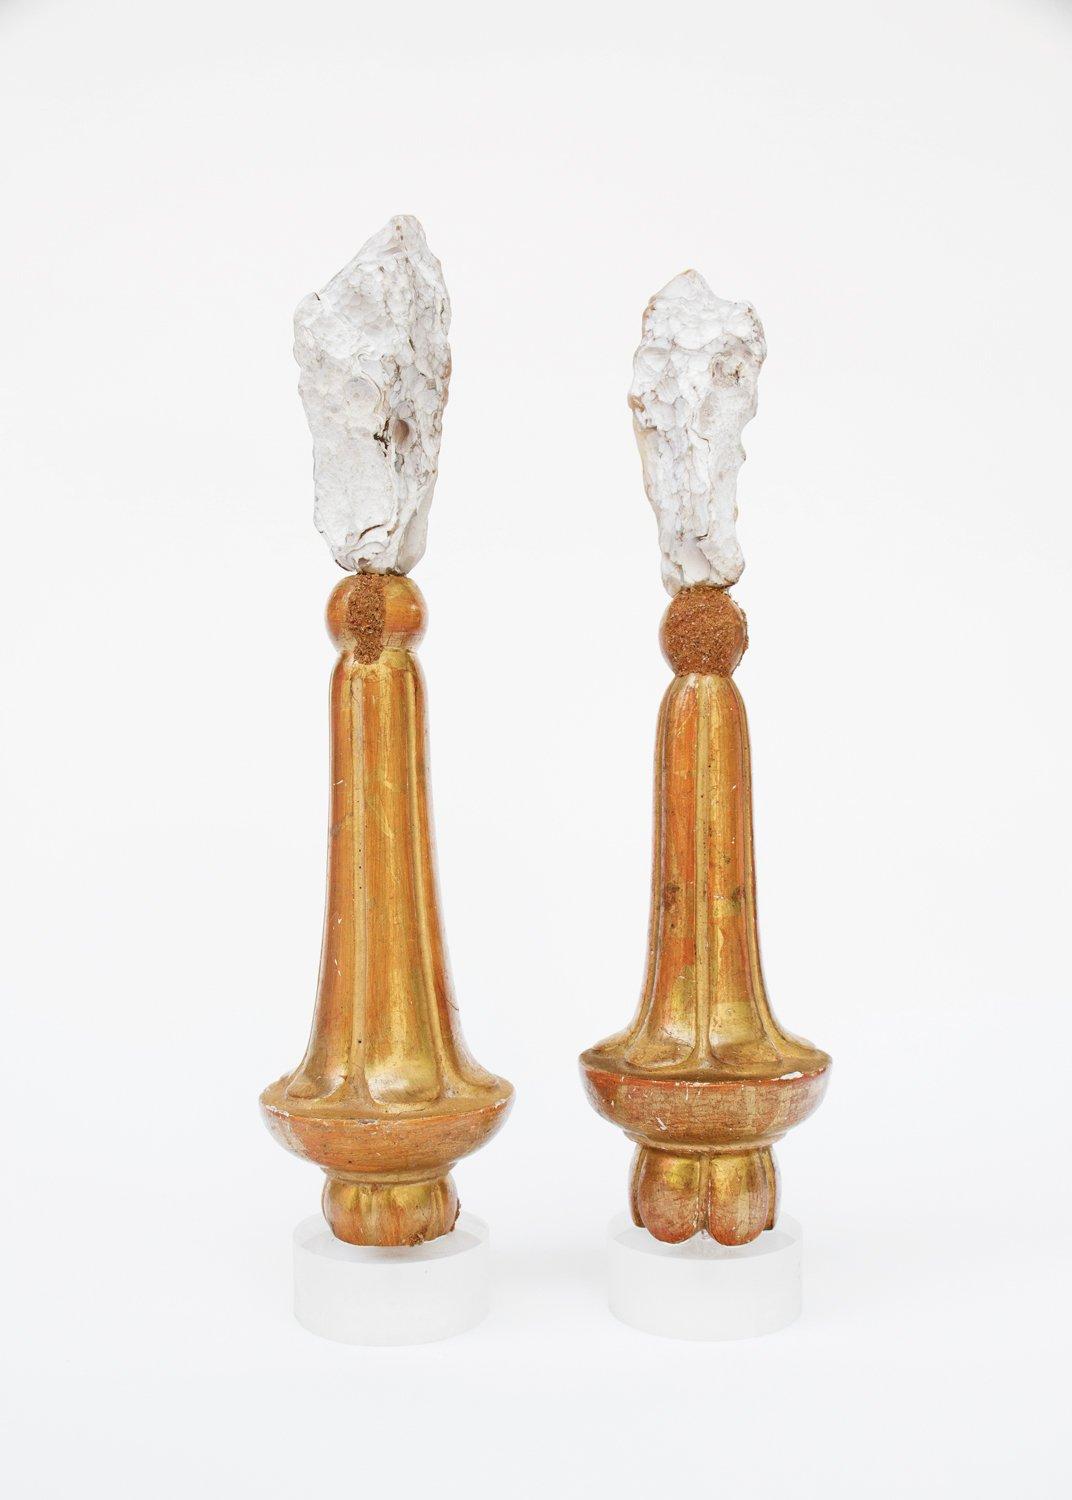 Pair of 18th Century Italian Finial Bases with Agate Coral on a Lucite Base In Good Condition For Sale In Dublin, Dalkey